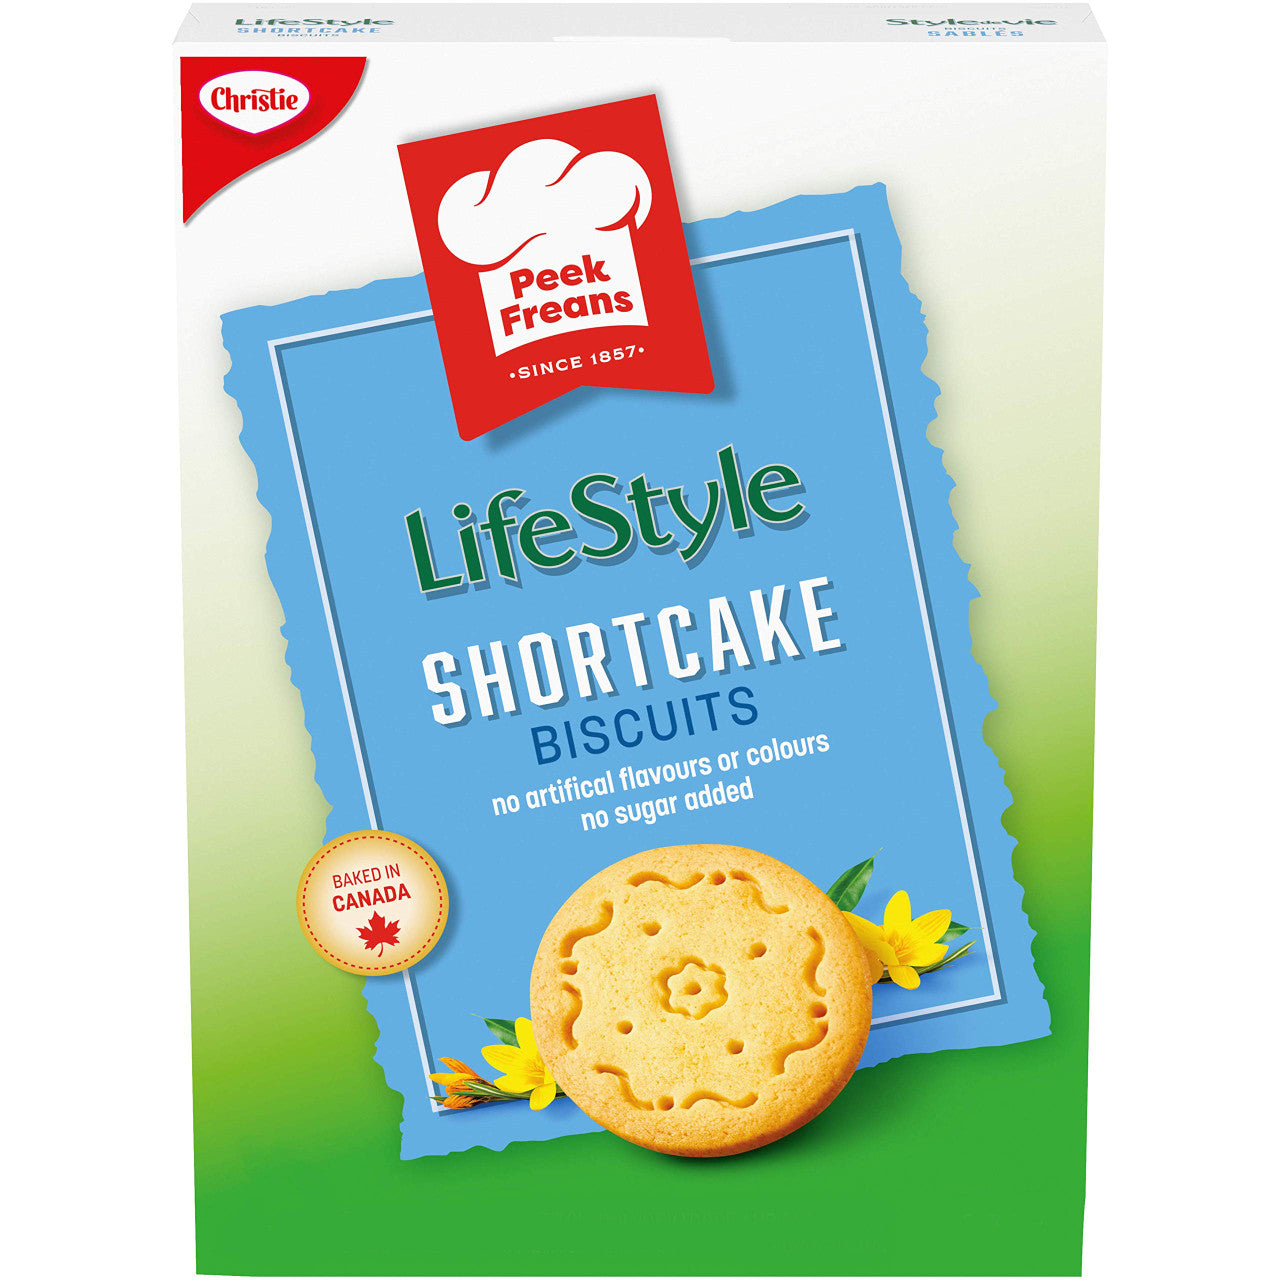 Christie, Peek Freans Lifestyle Shortcake Biscuits, No Sugar Added, 290g/10.2 oz., Box, {Imported from Canada}